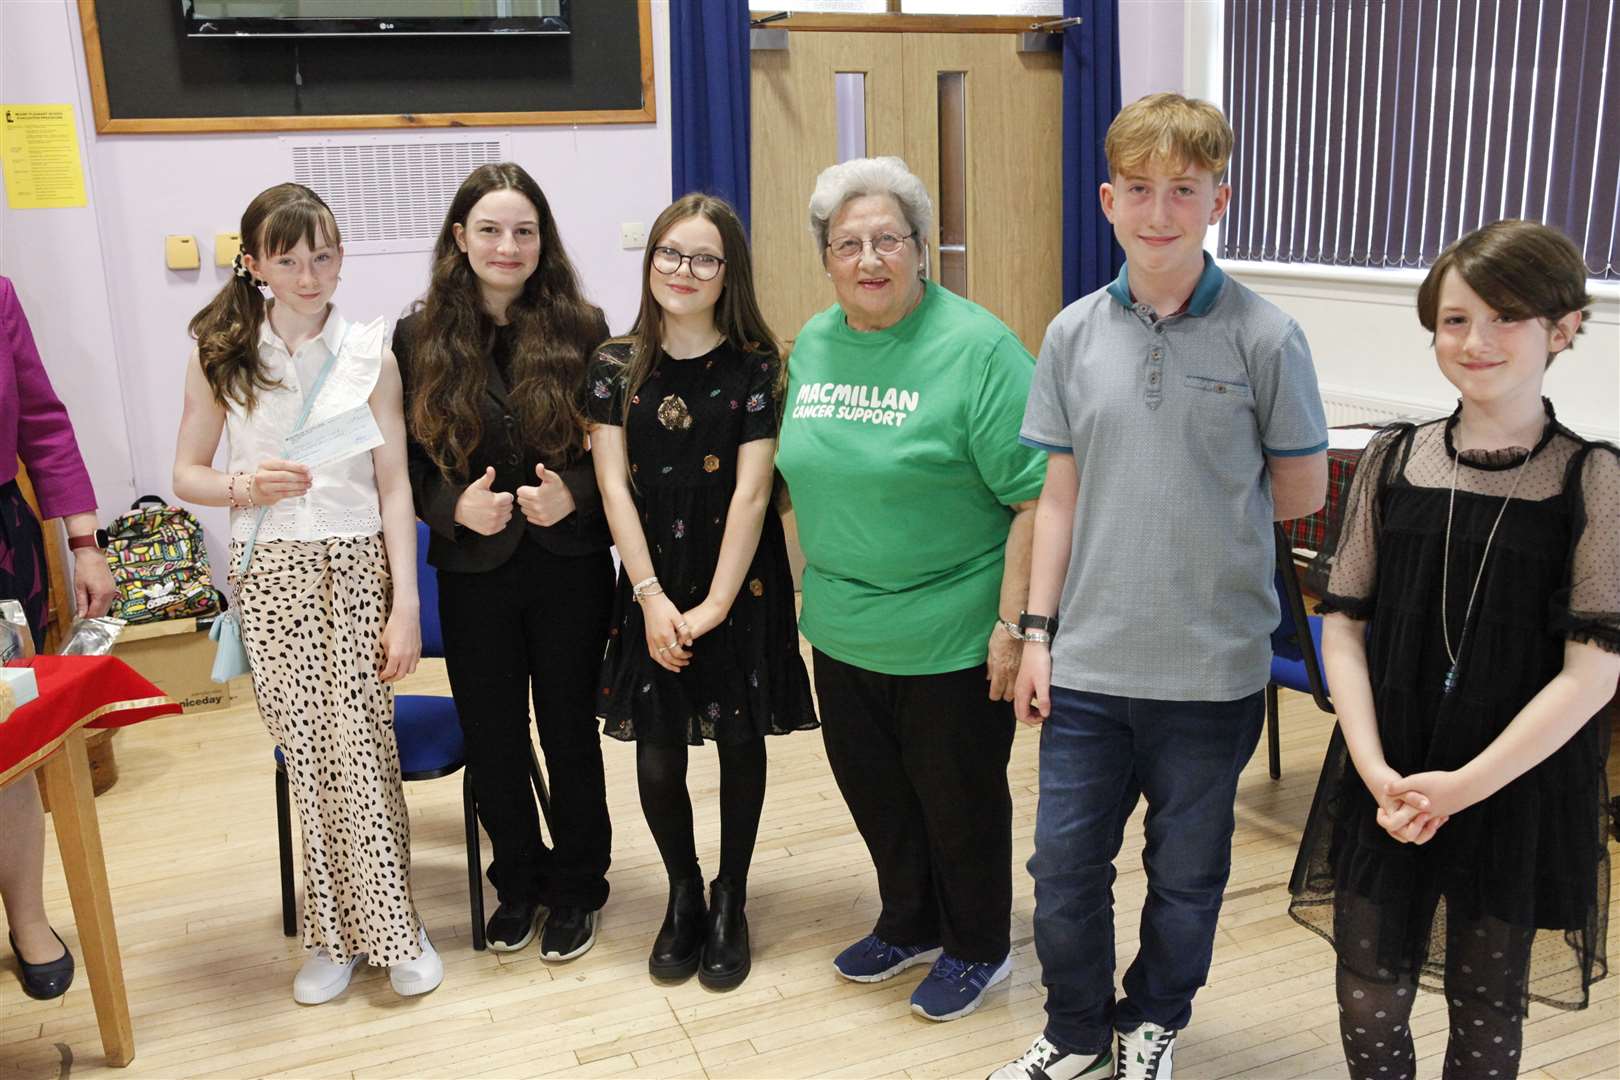 Primary 7 house captains present a cheque for £100 to Sheila Sinclair for the local branch of Macmillan.